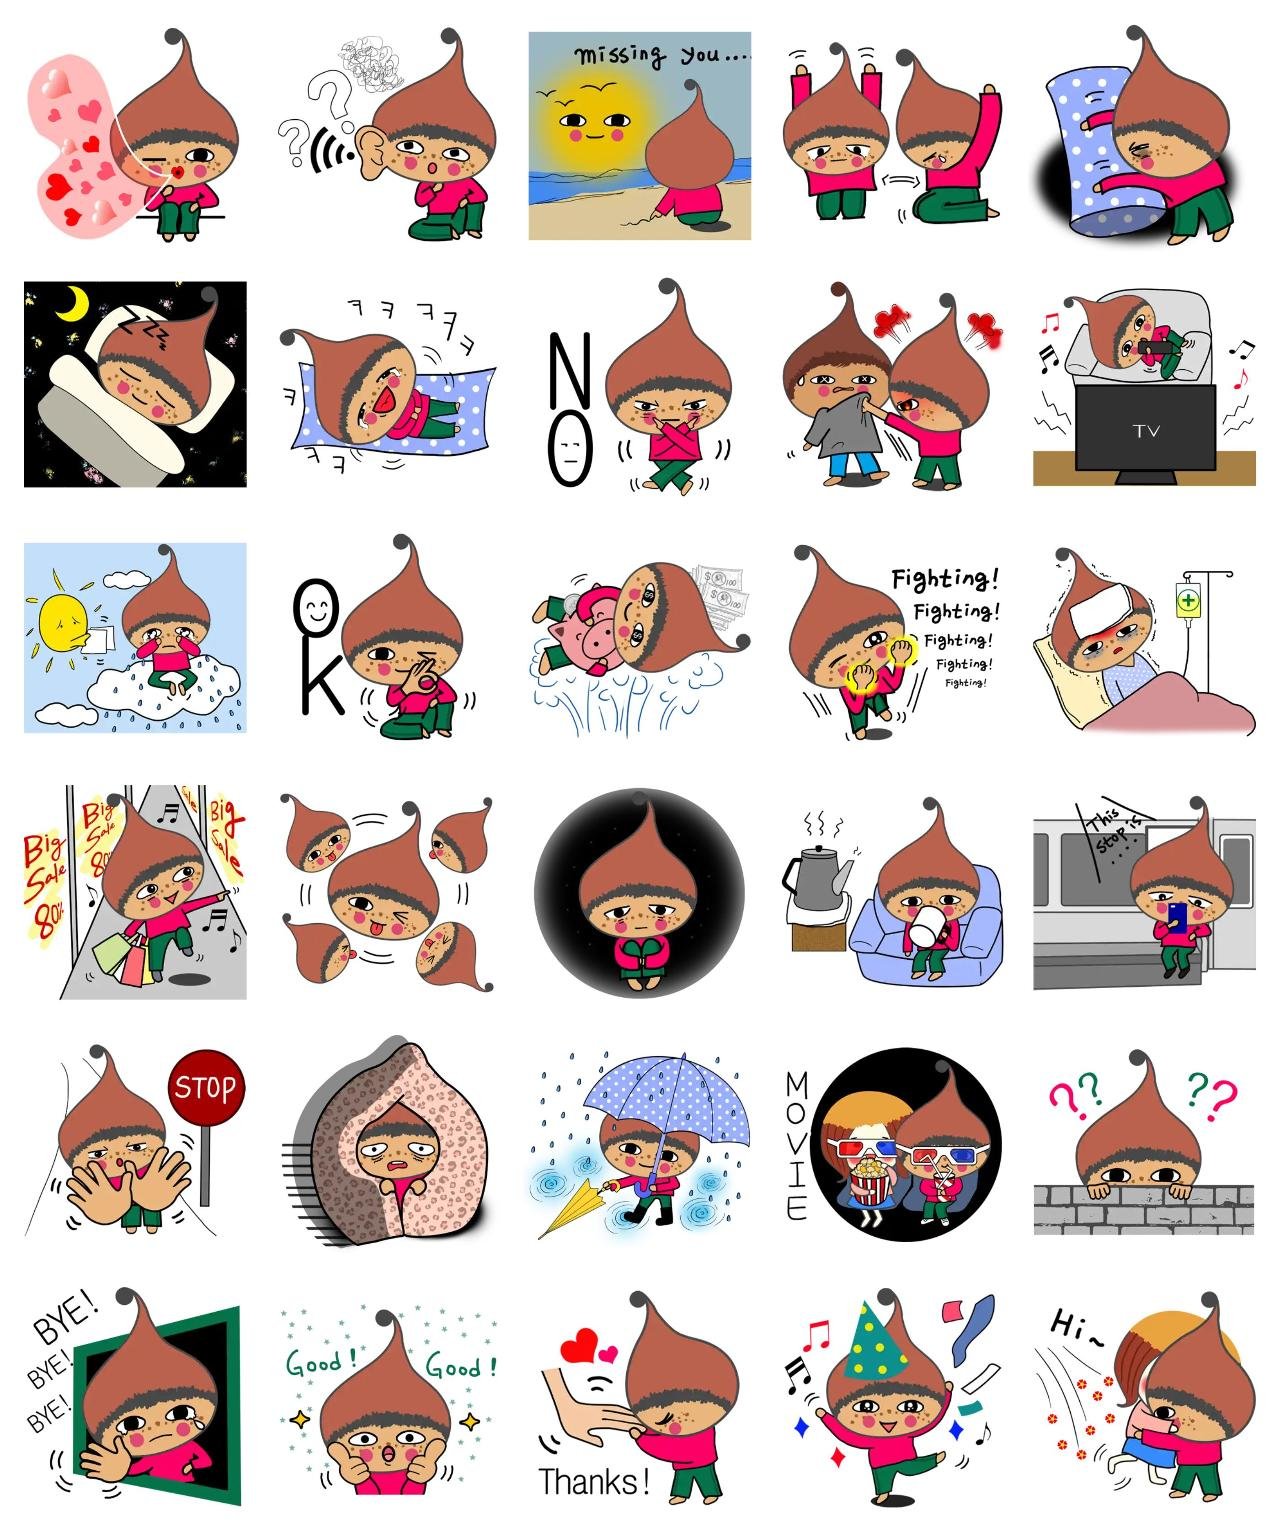 Kimtori Animation/Cartoon,Food/Drink sticker pack for Whatsapp, Telegram, Signal, and others chatting and message apps